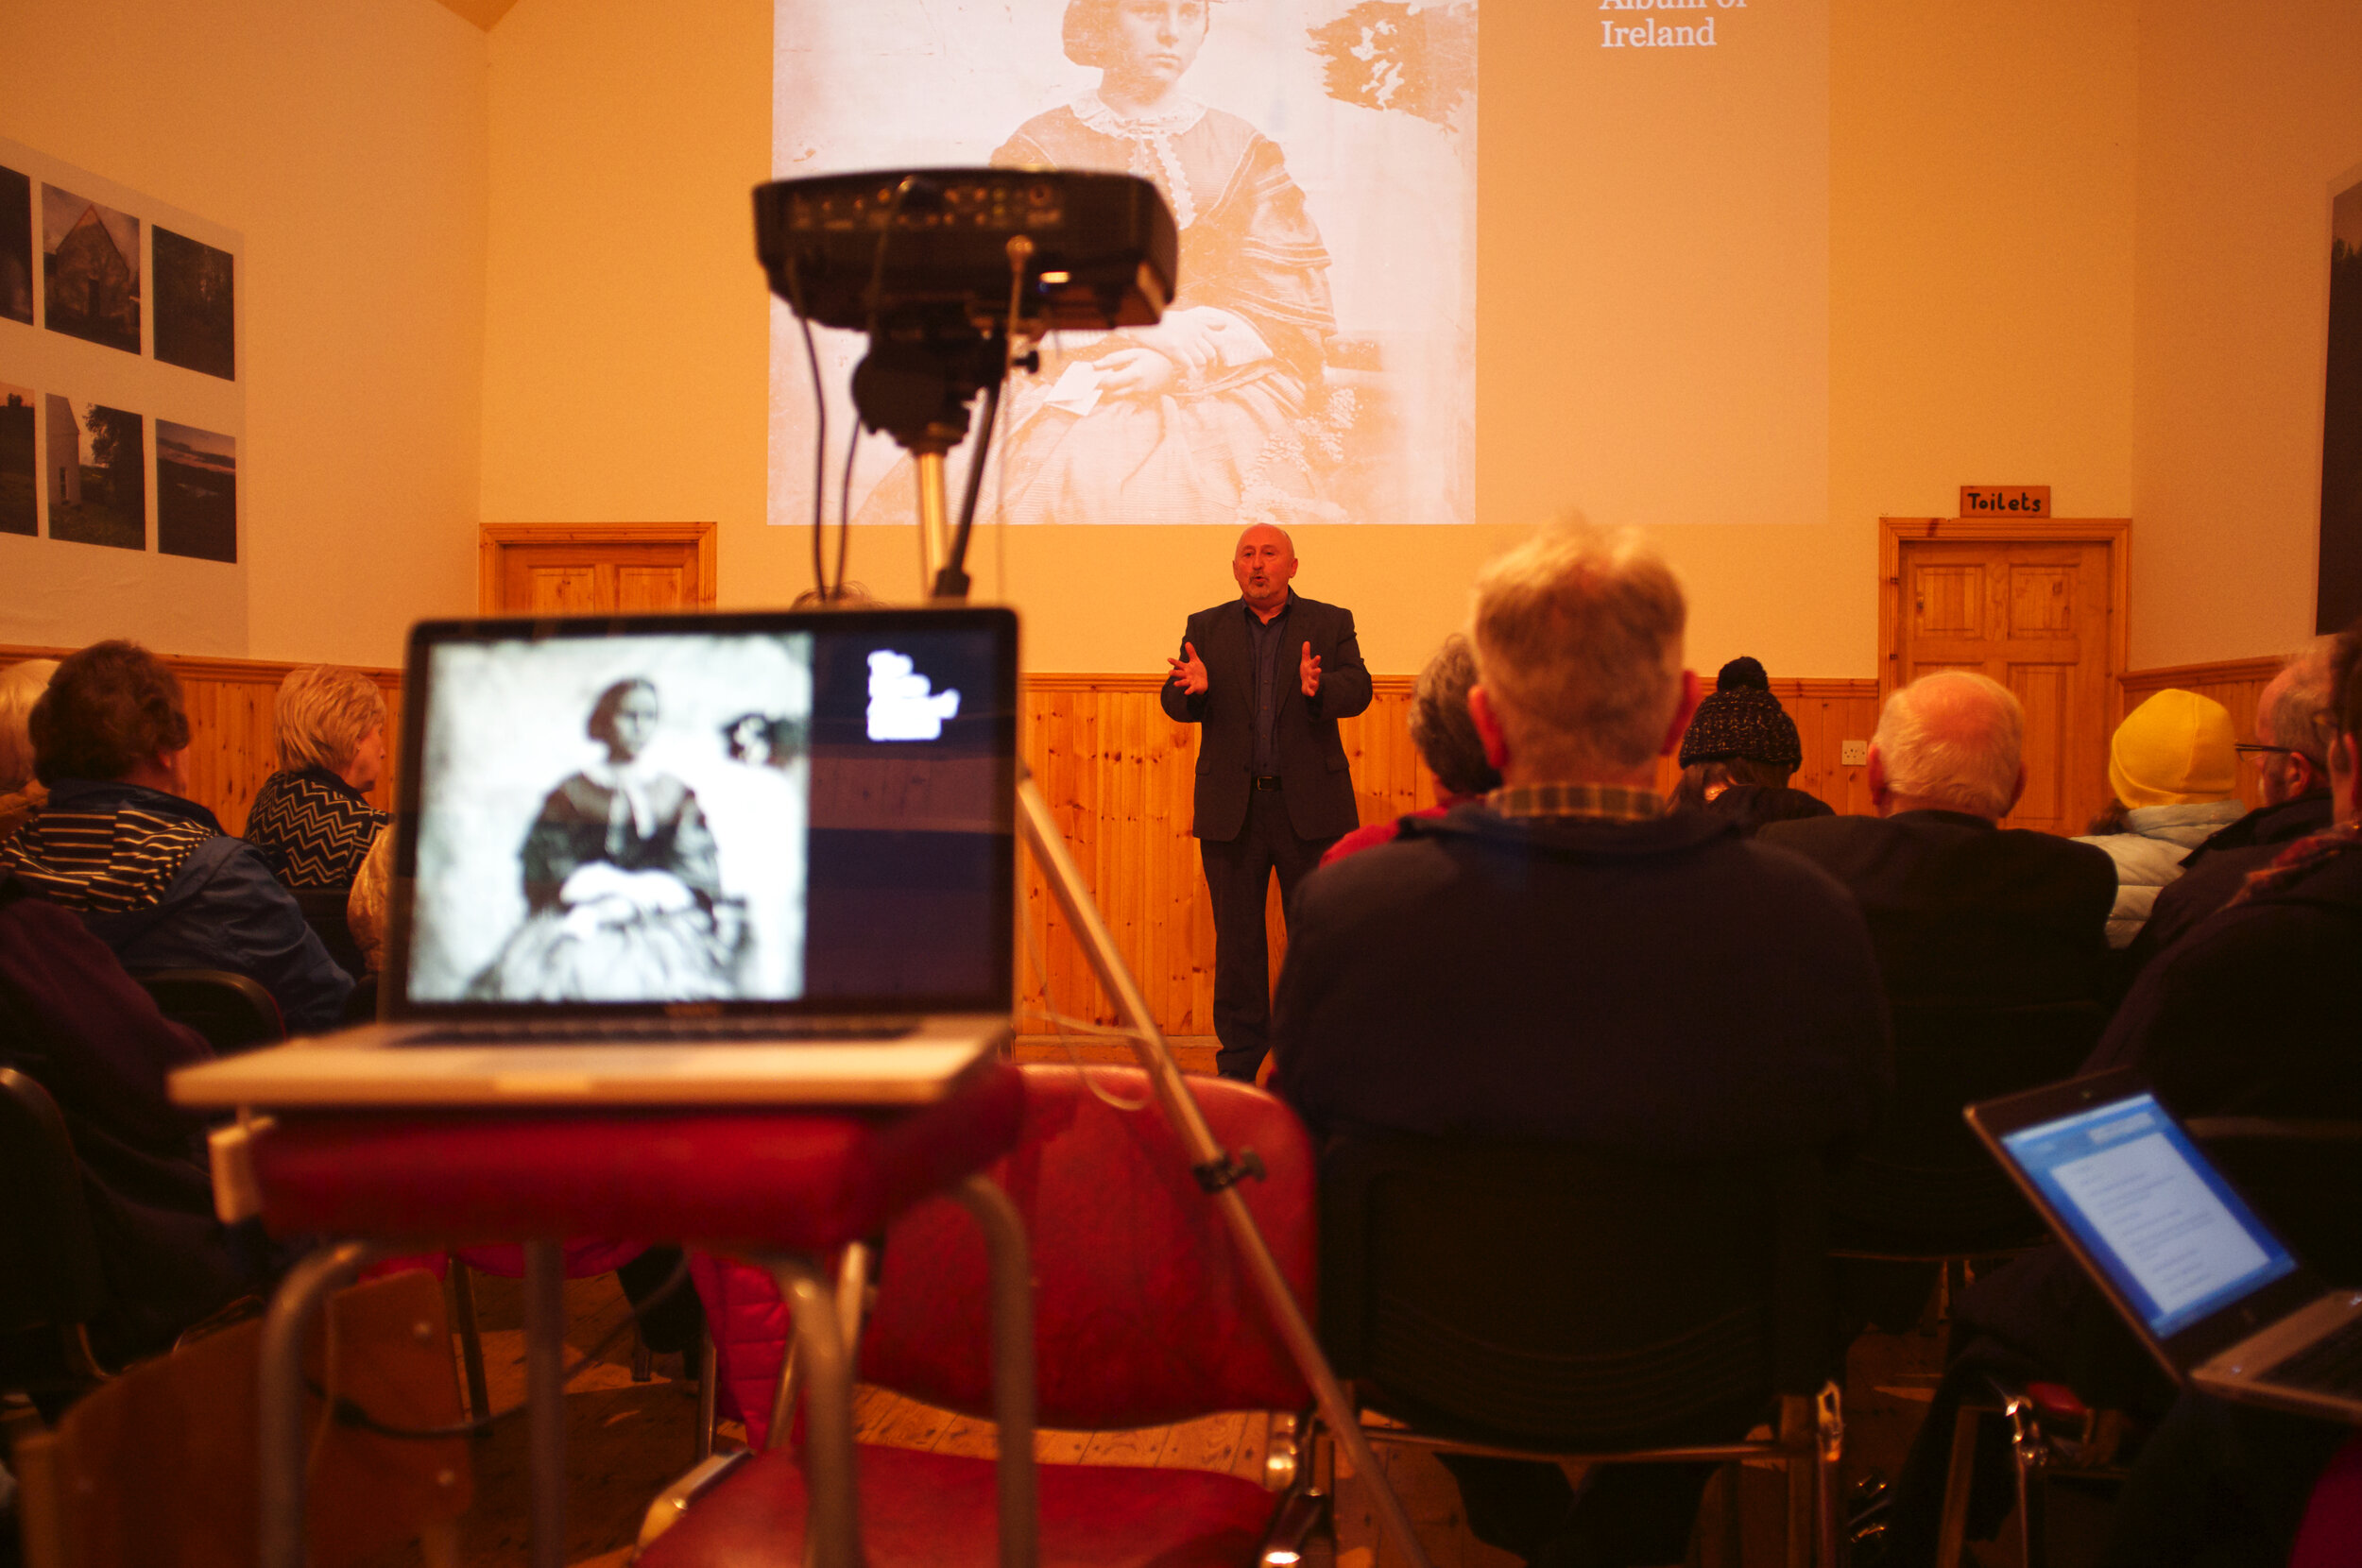  Prof Terence Dooley giving a lecture on the Photo Album of Ireland in Drum 